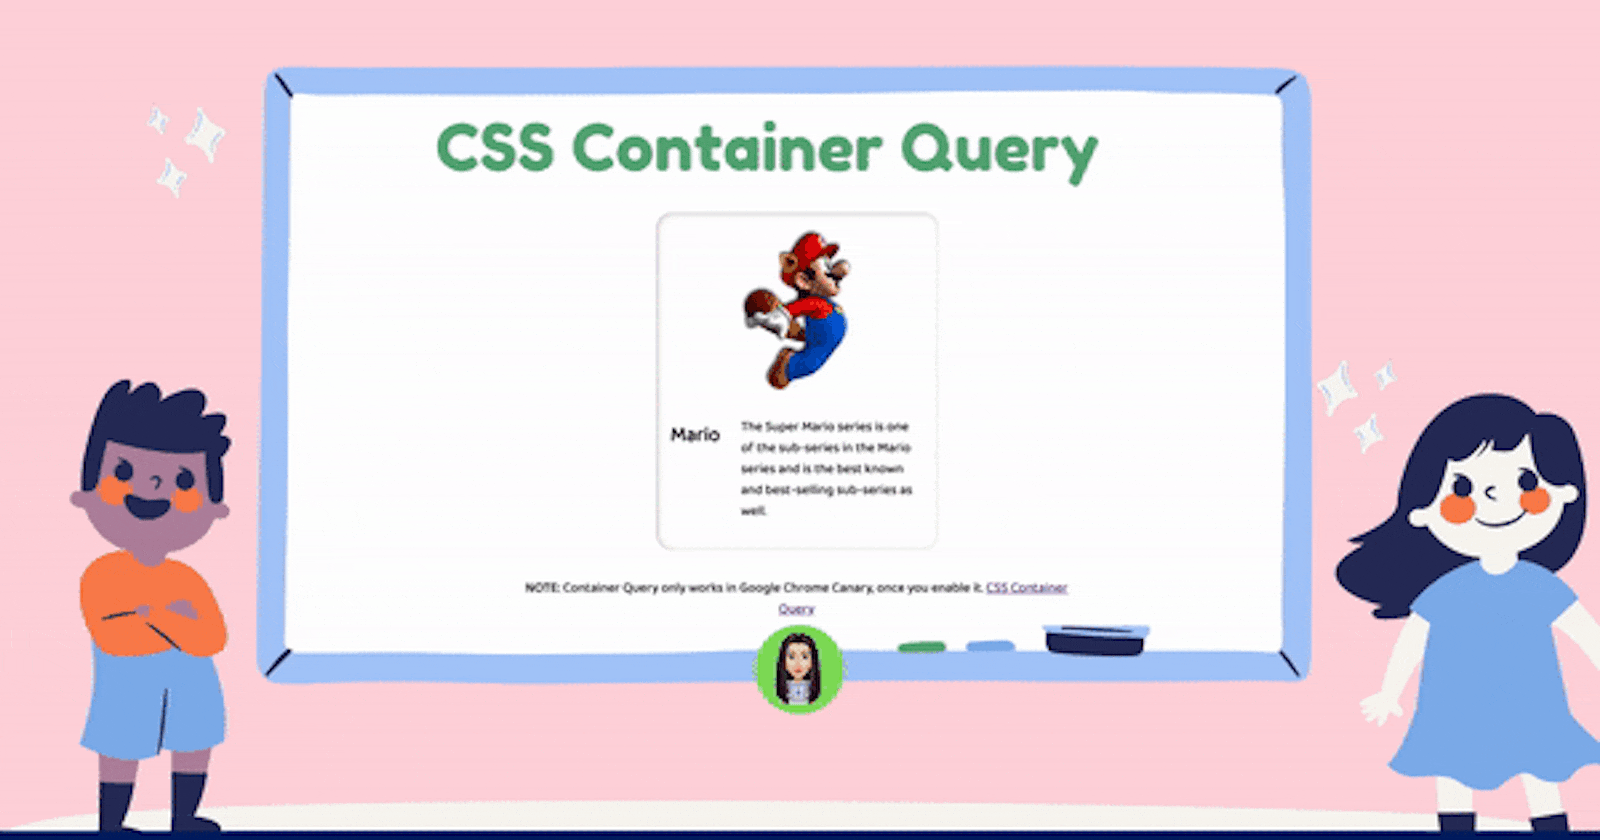 Future of CSS - Container Query